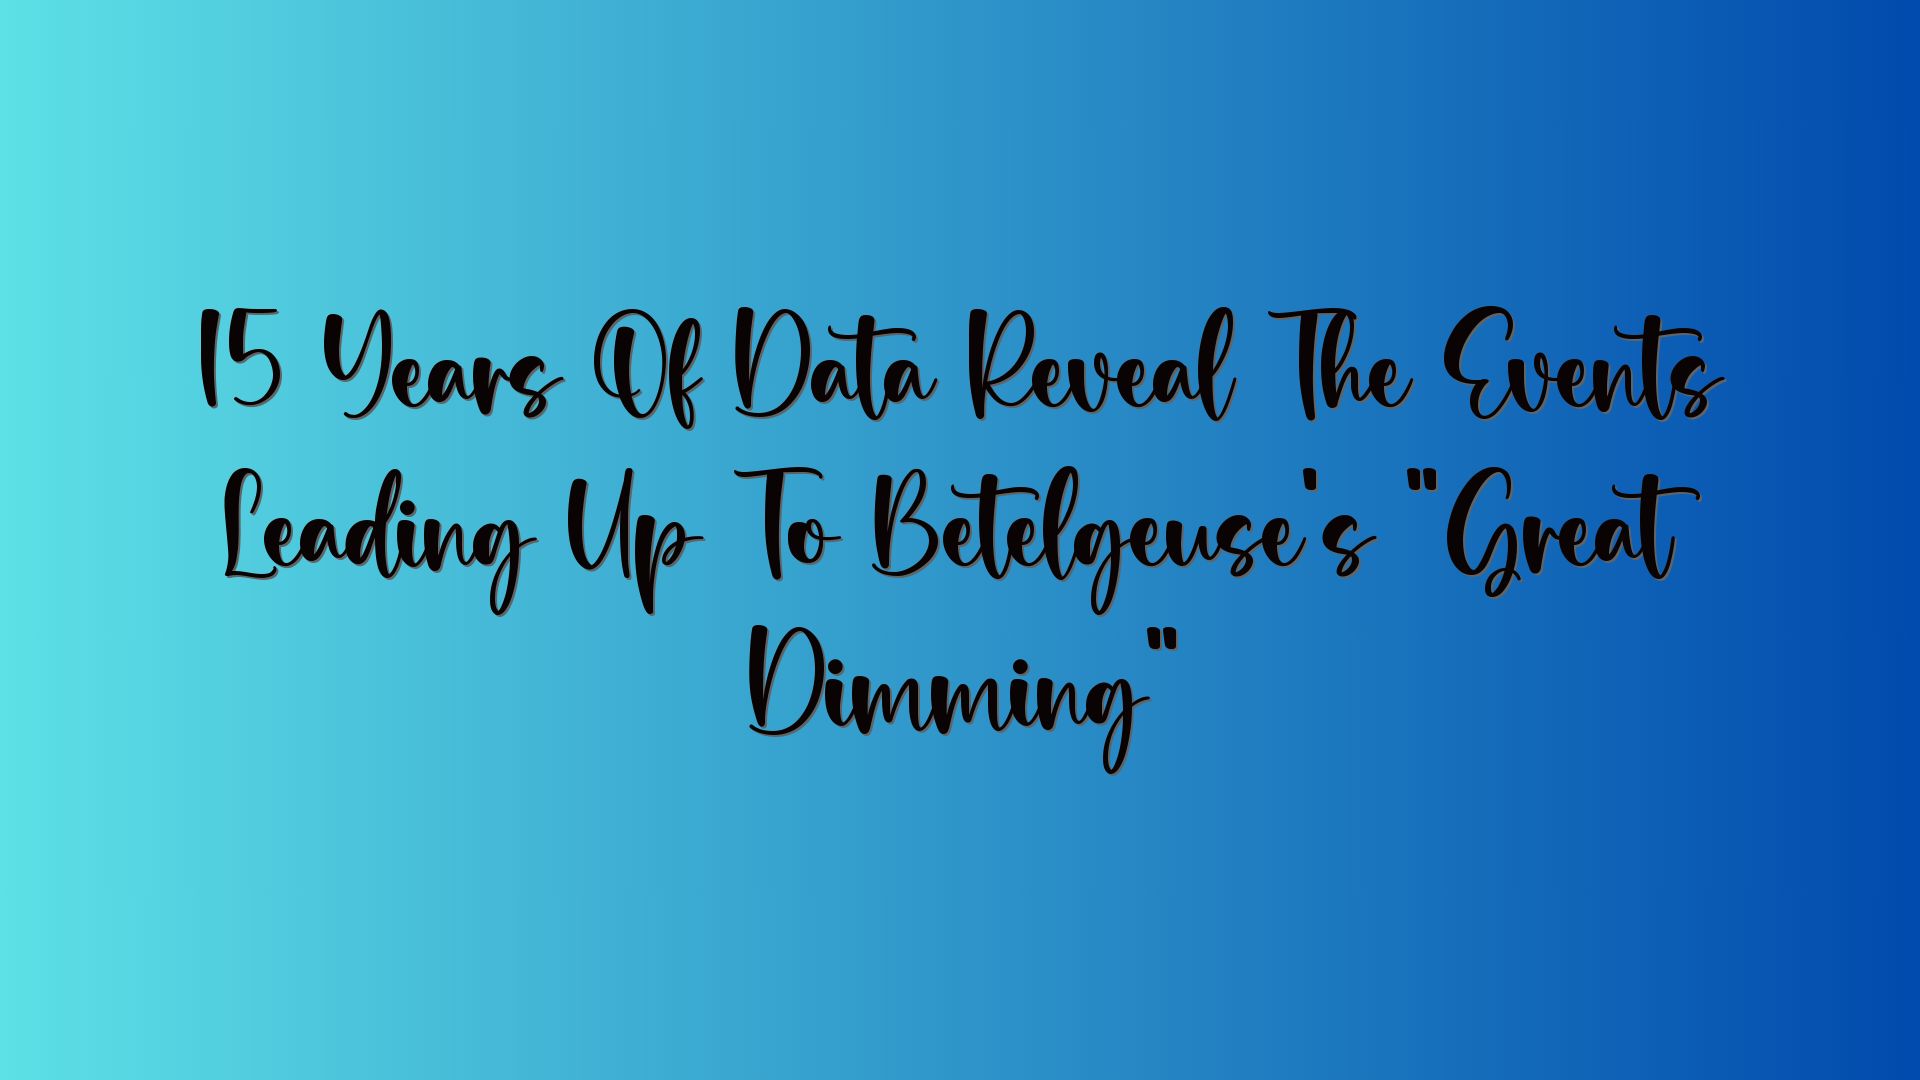 15 Years Of Data Reveal The Events Leading Up To Betelgeuse’s “Great Dimming”